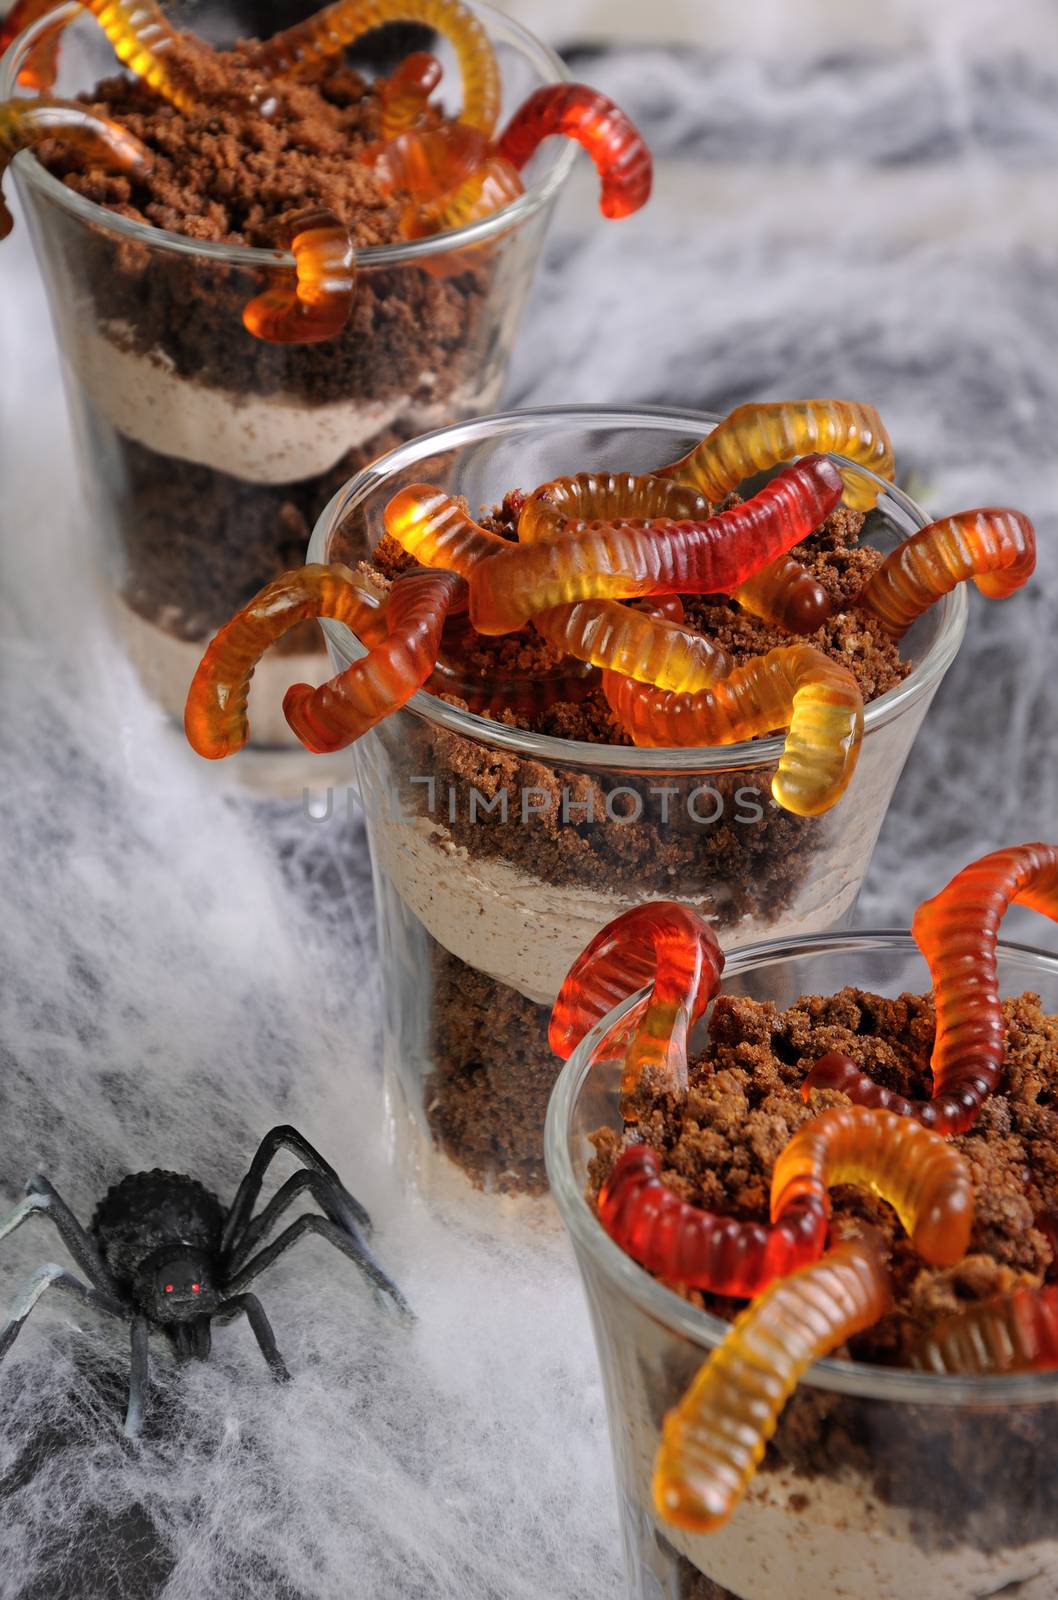 Dessert for Halloween by Apolonia